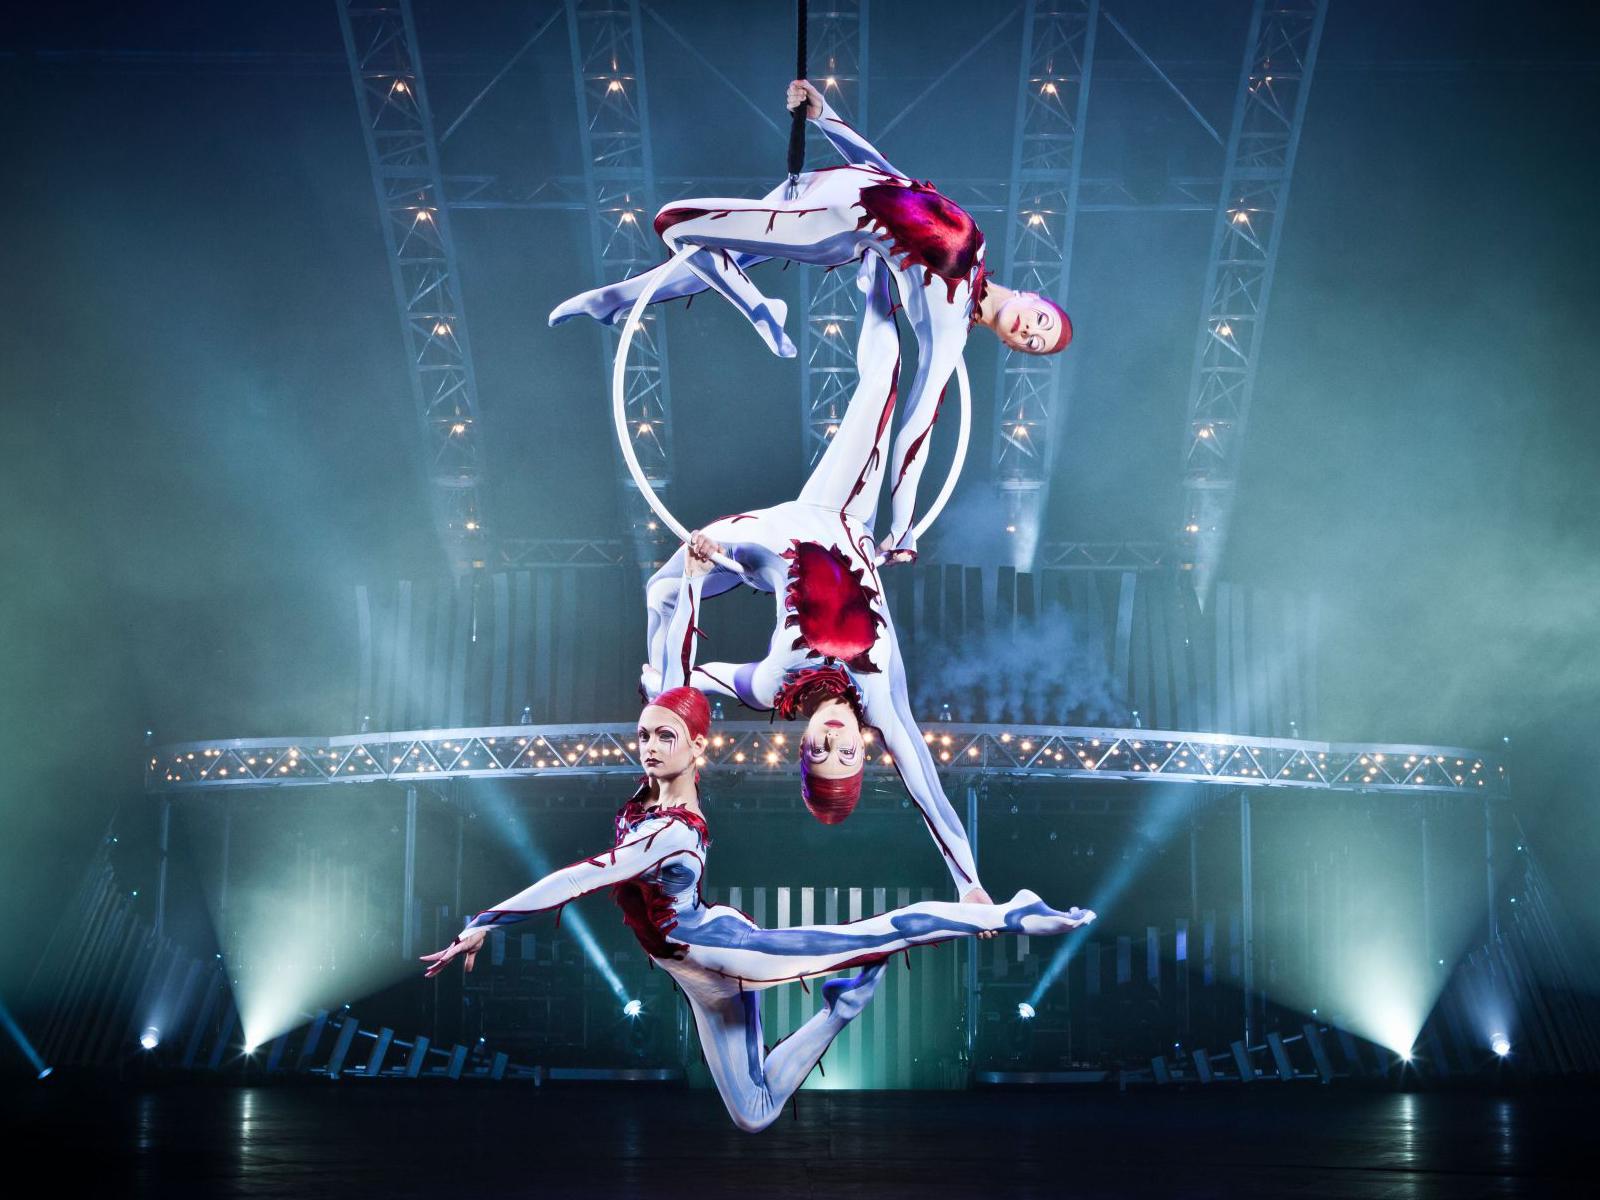 Cirque du Soleil performer falls from trapeze in horrific accident